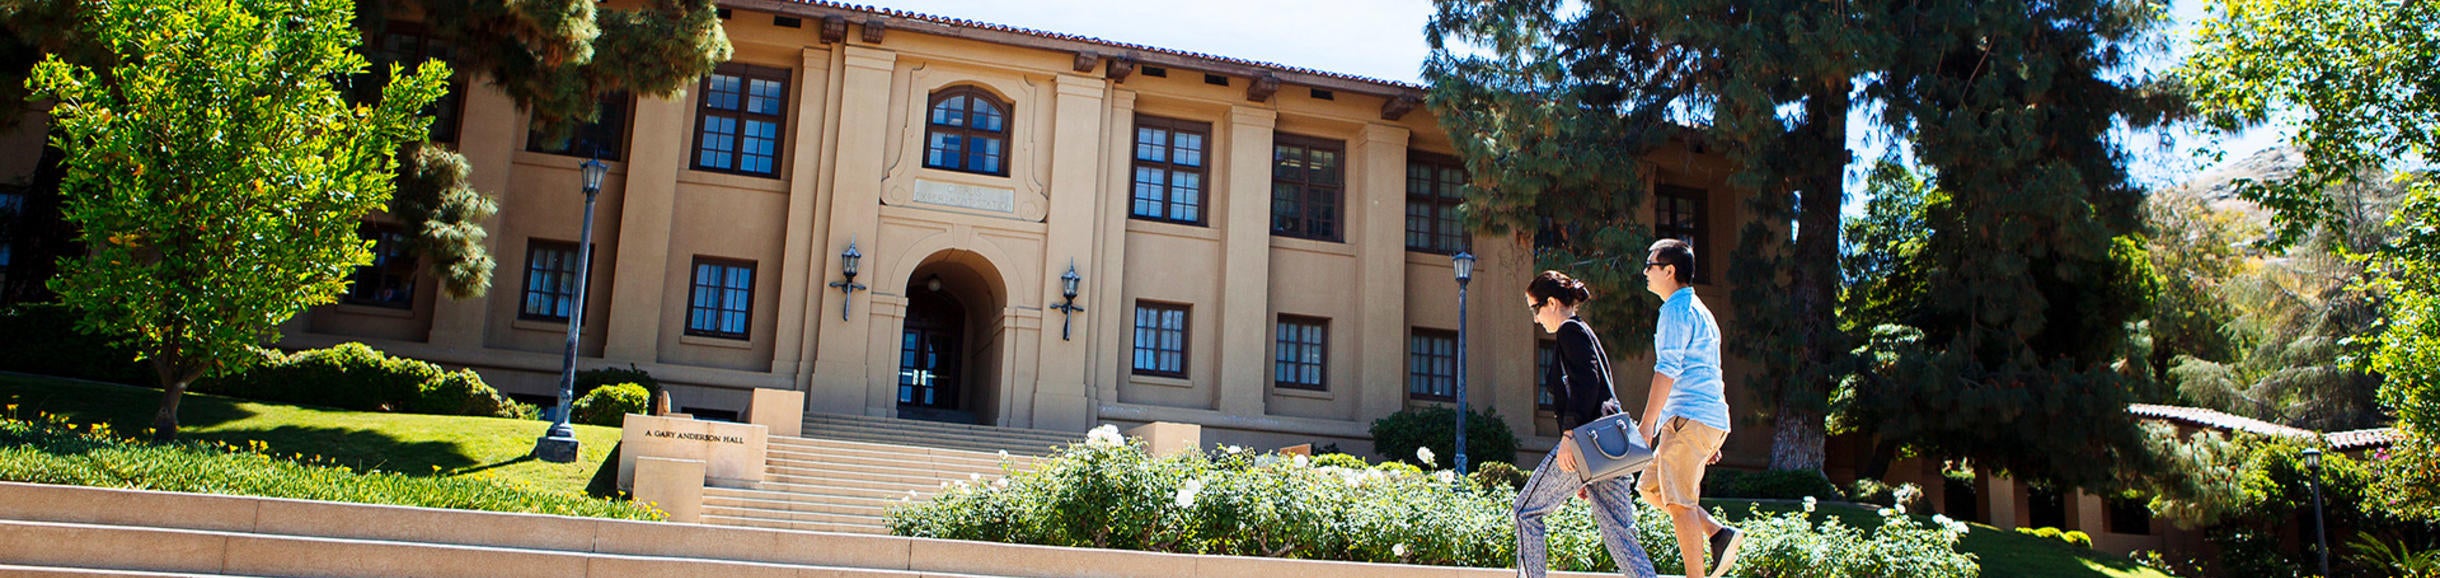 Anderson Hall UCR School of Business